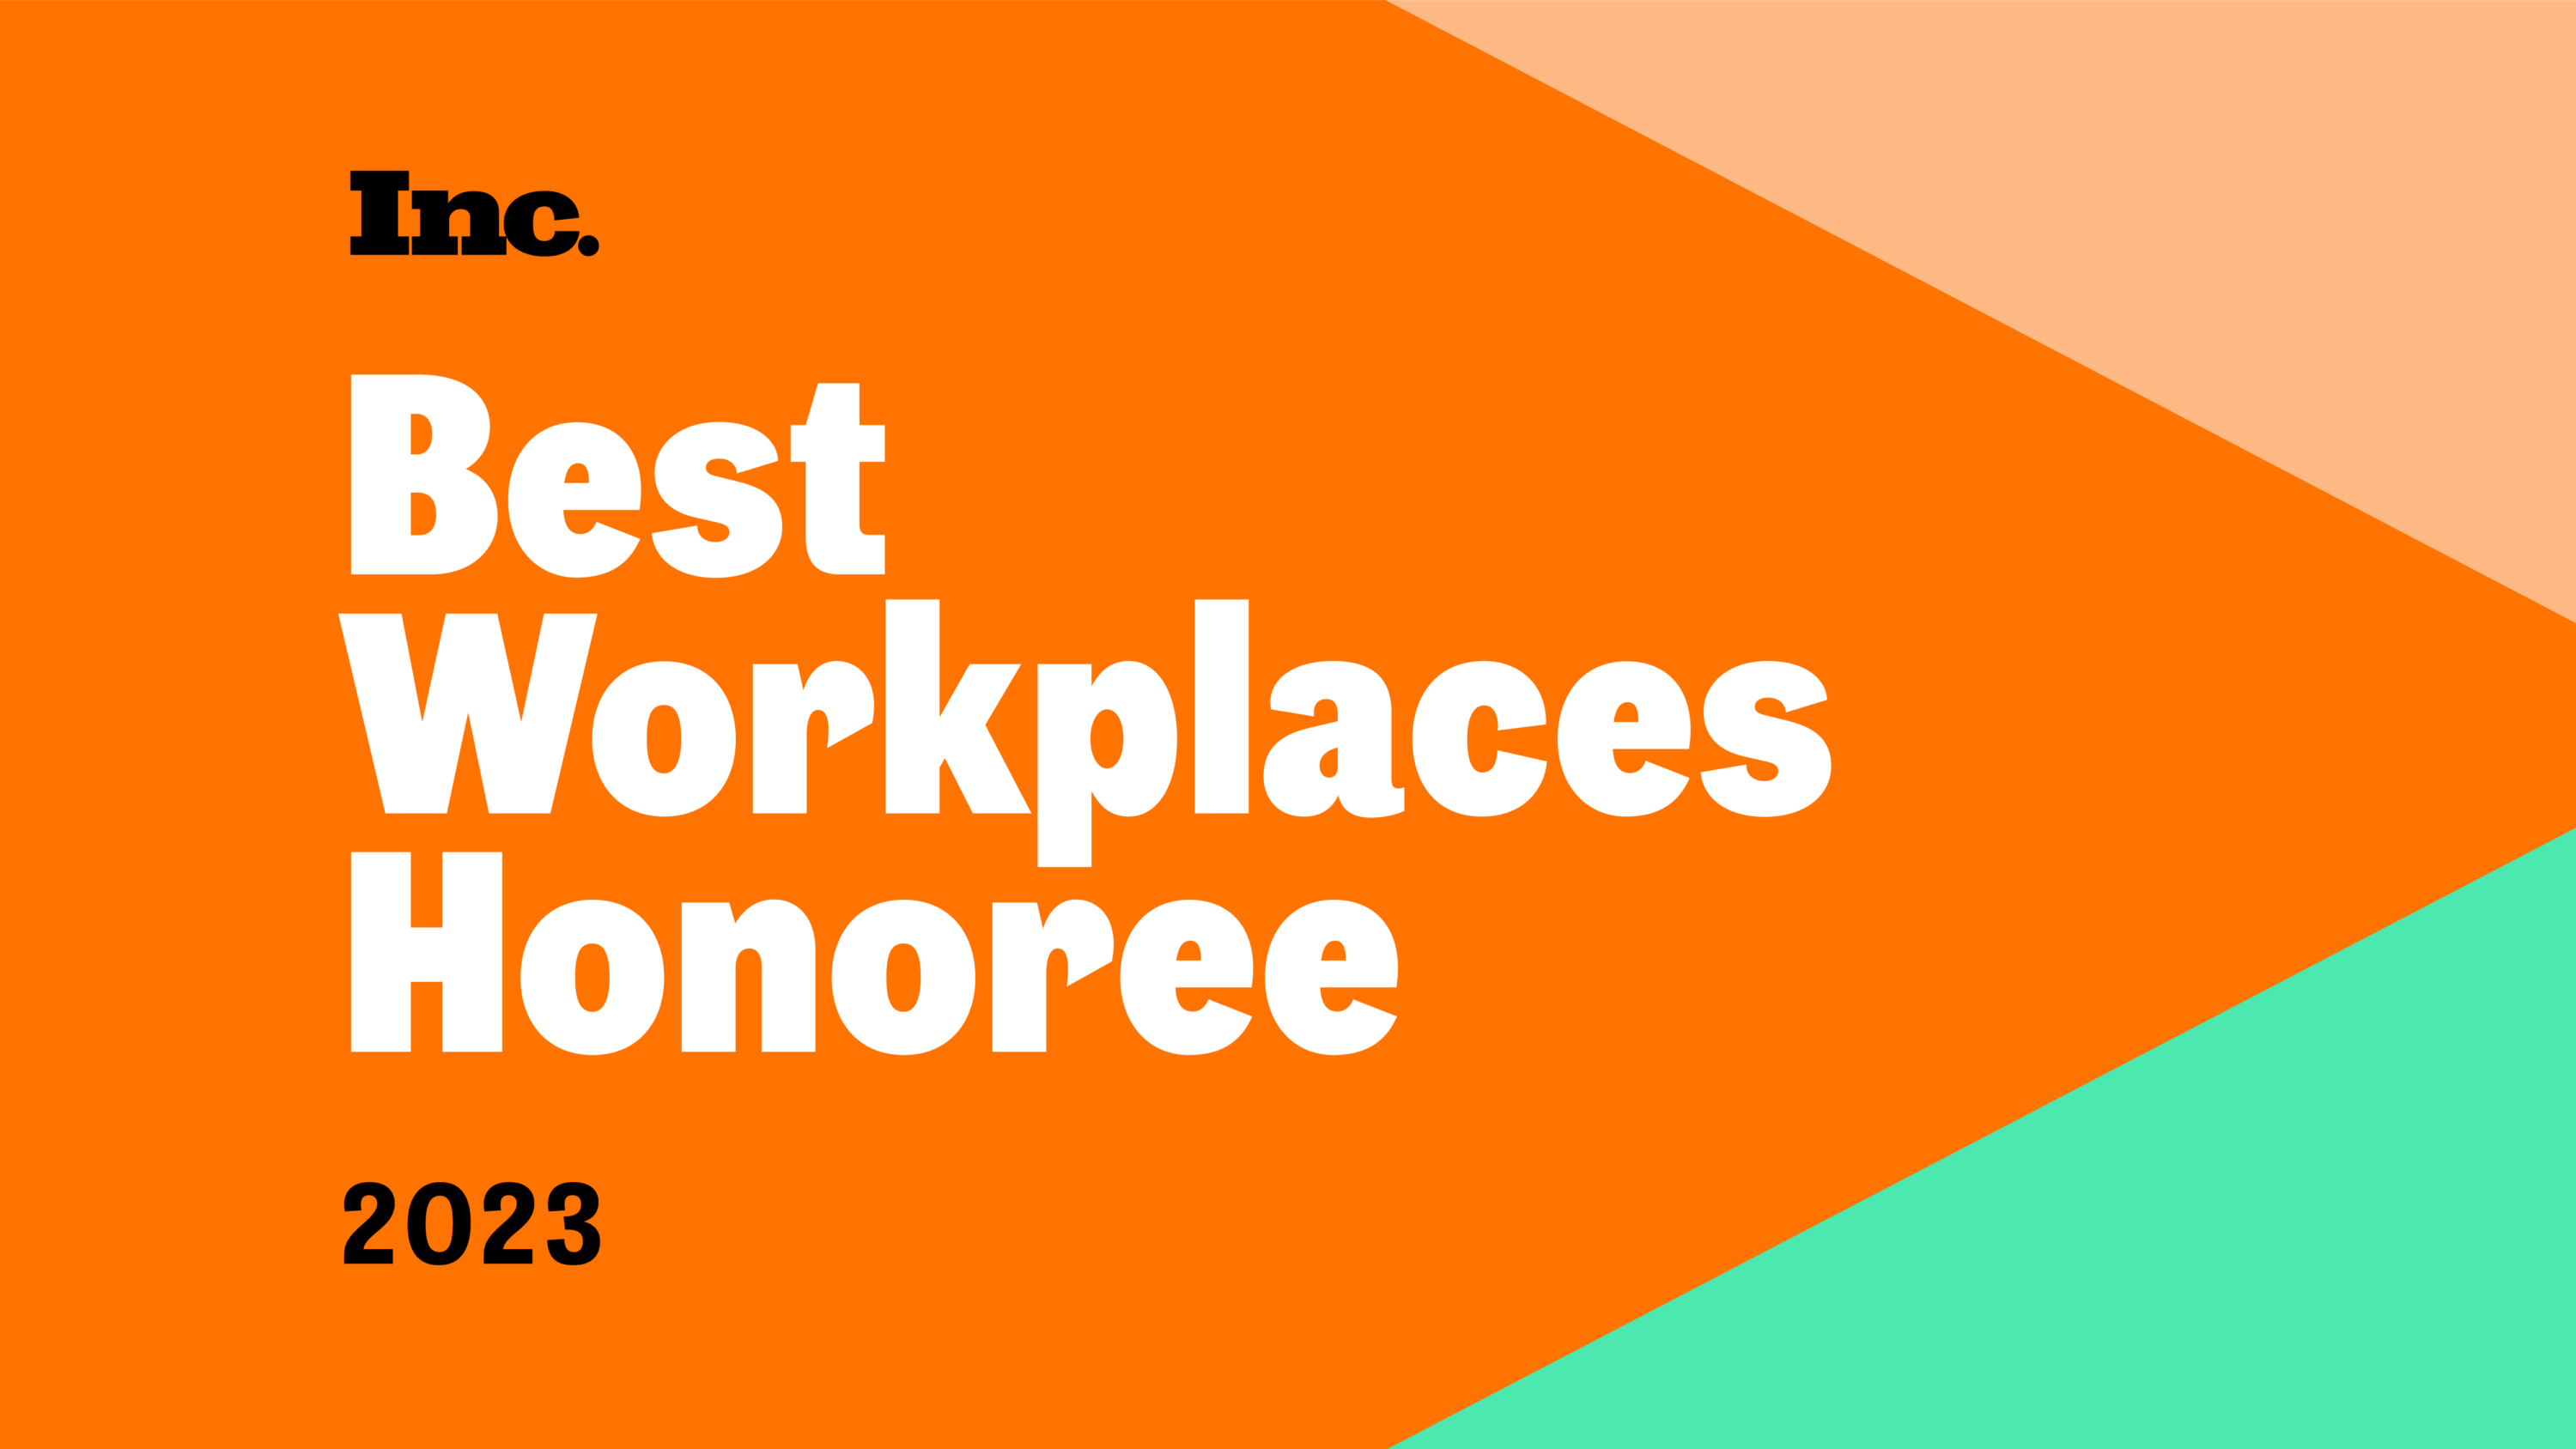 Apploi Honored as One of Inc. Magazine’s Best Workplaces of 2023